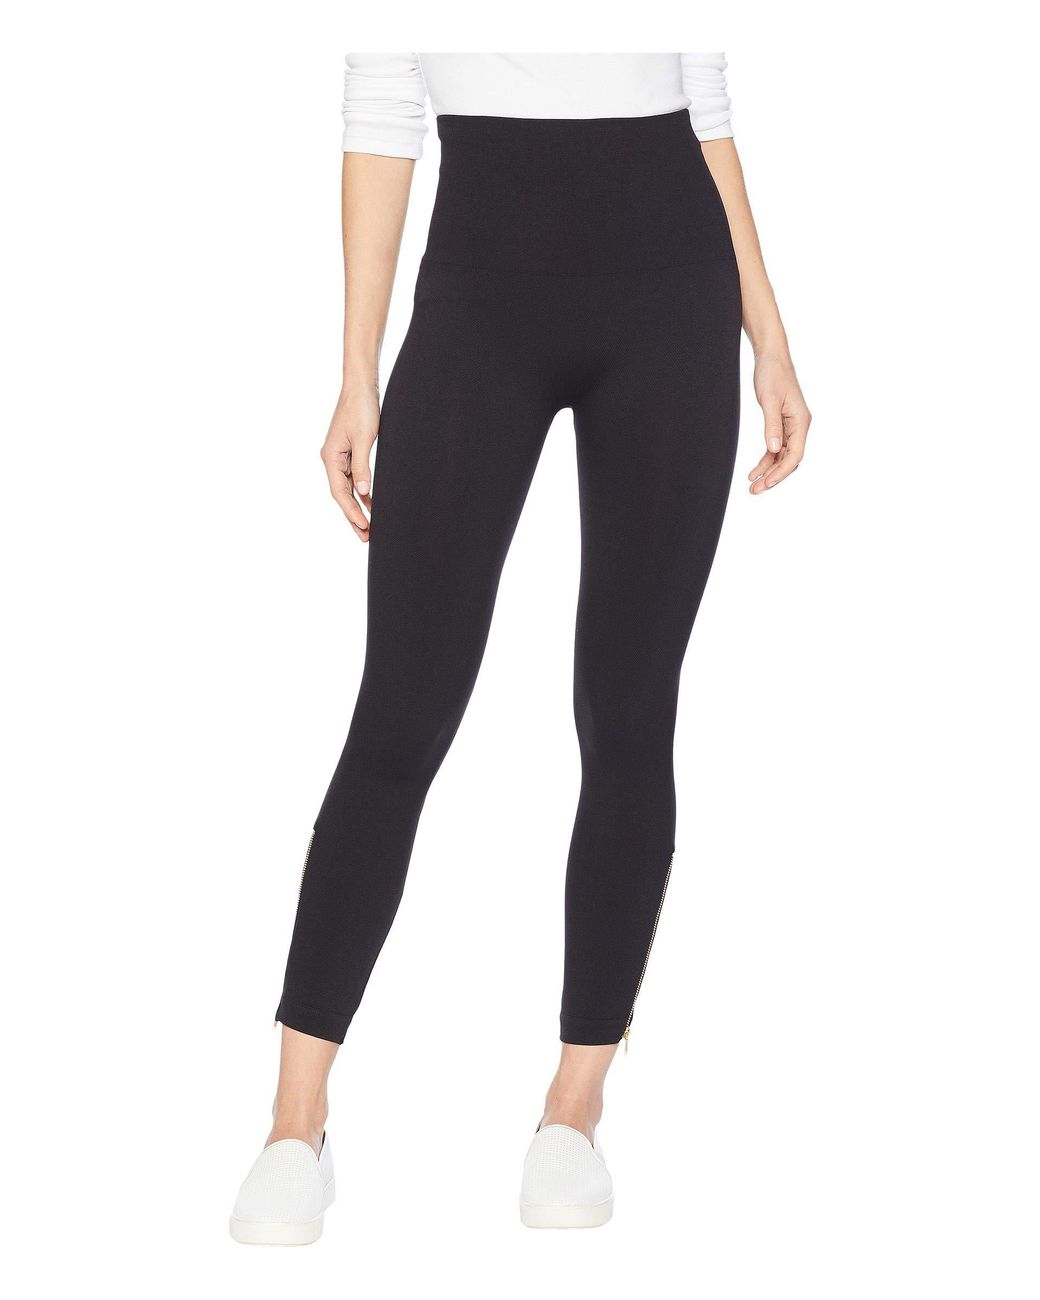 SPANX, Pants & Jumpsuits, Spanx New Tags Look At Me Now Seamless Leggings  High Waist Rise Stretch Pant S